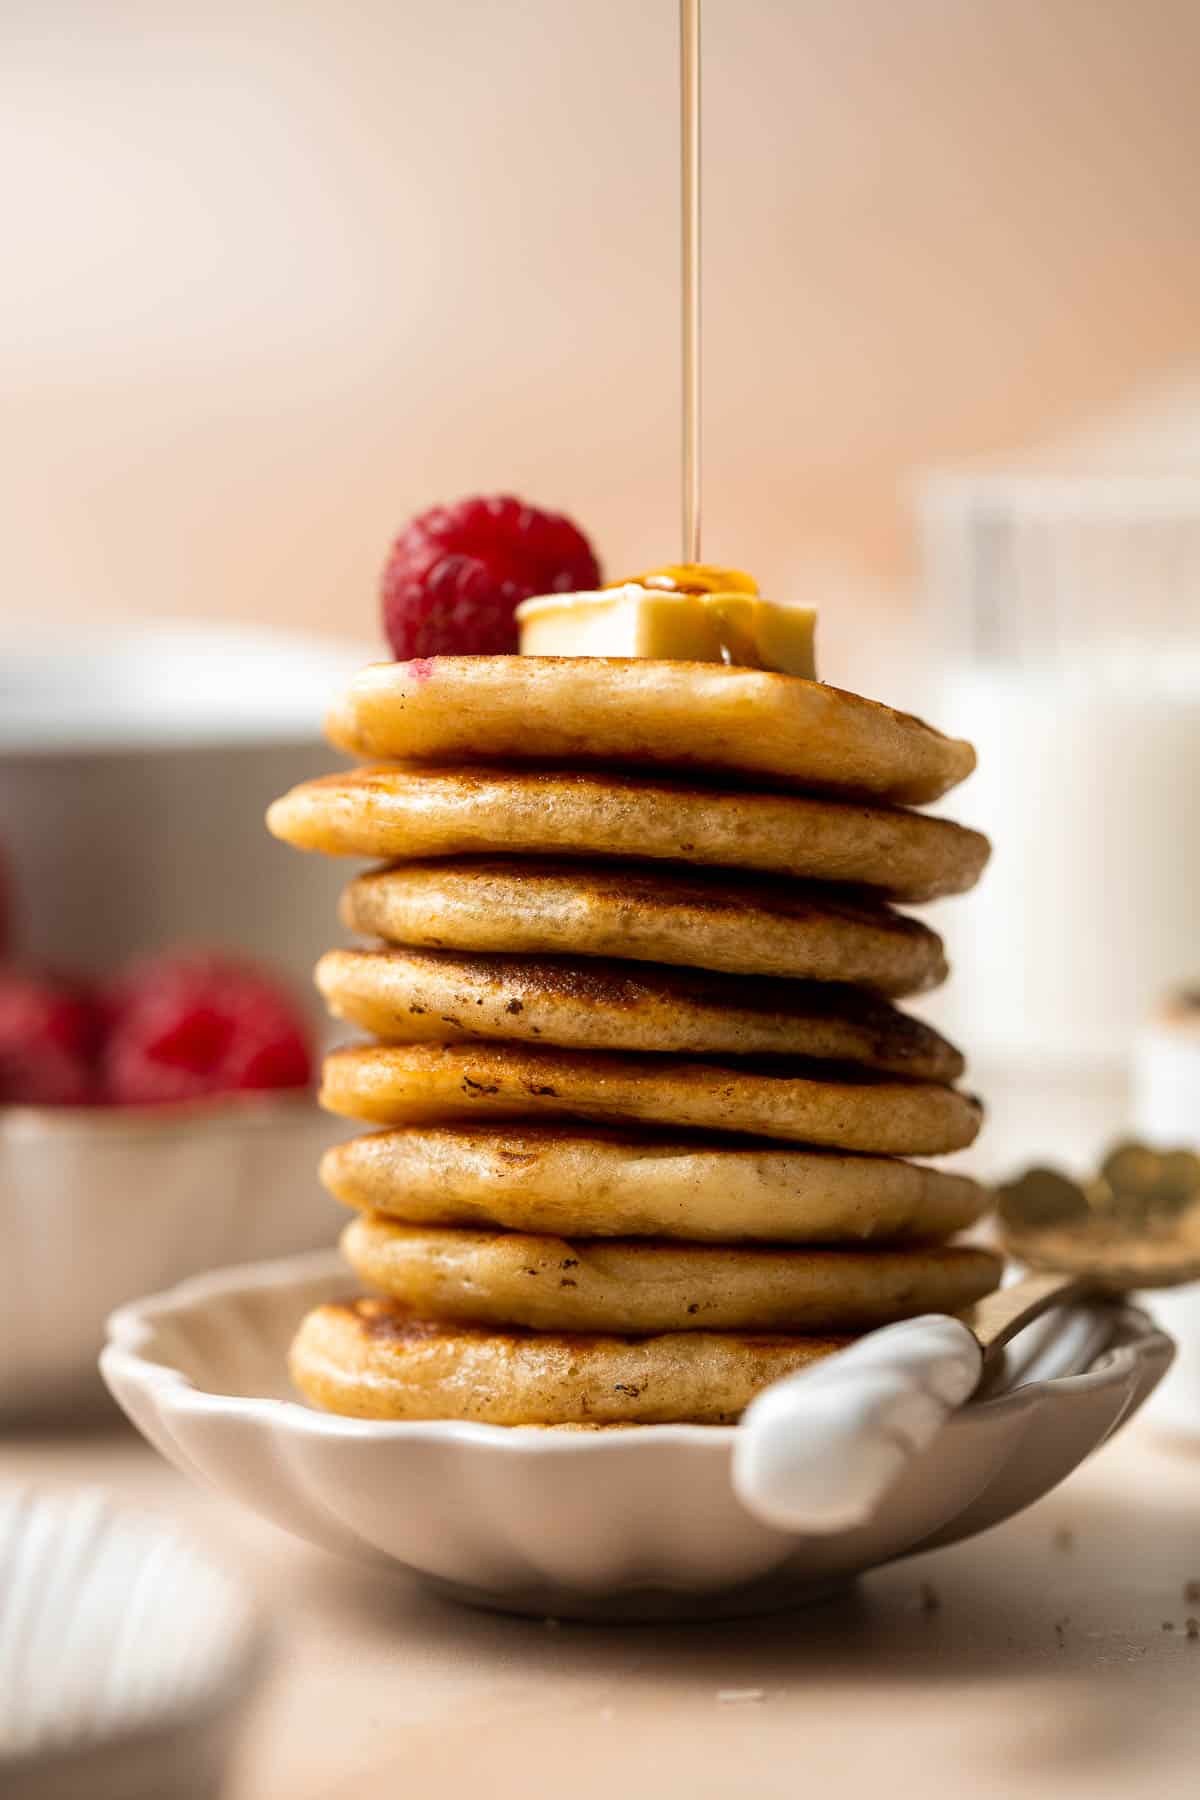 Mini Pancakes (Silver Dollar Pancakes) are the fluffy, fun-sized version of classic pancakes. They're easy to make using a handful of everyday ingredients. | aheadofthyme.com